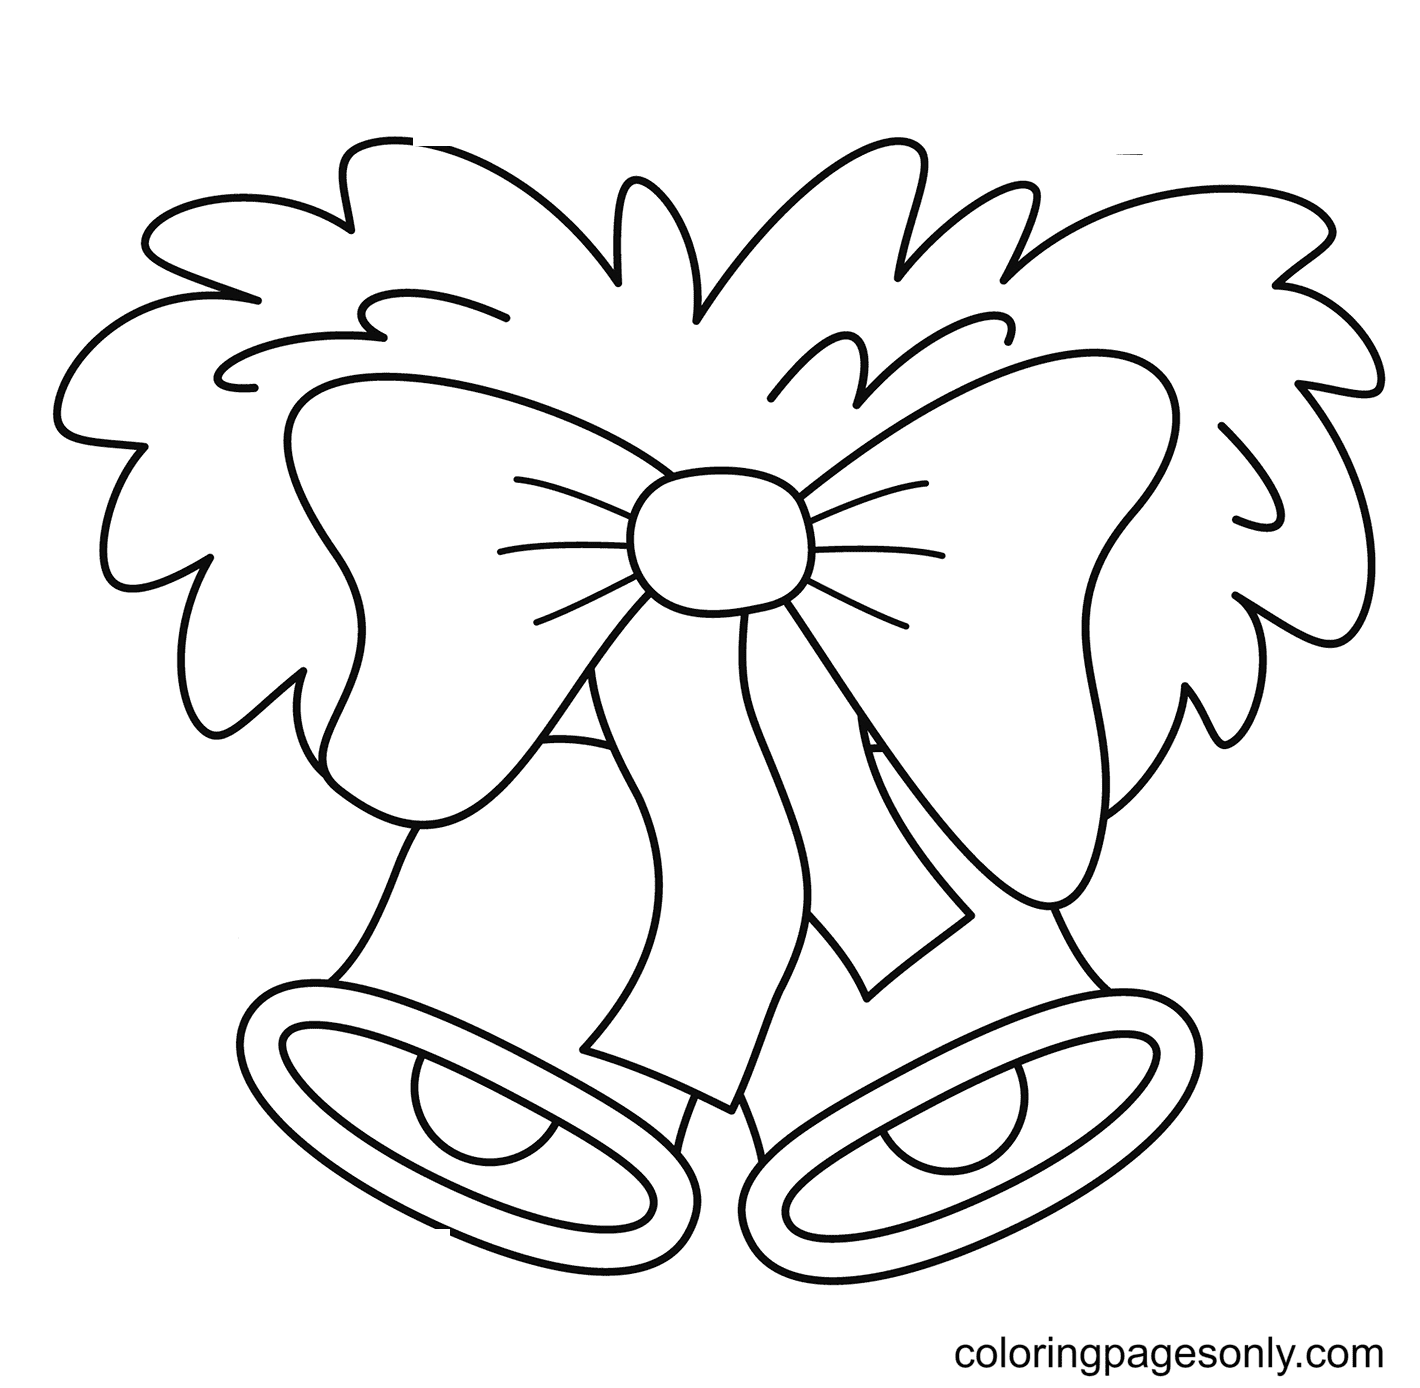 Lovely Christmas Bells Coloring Page